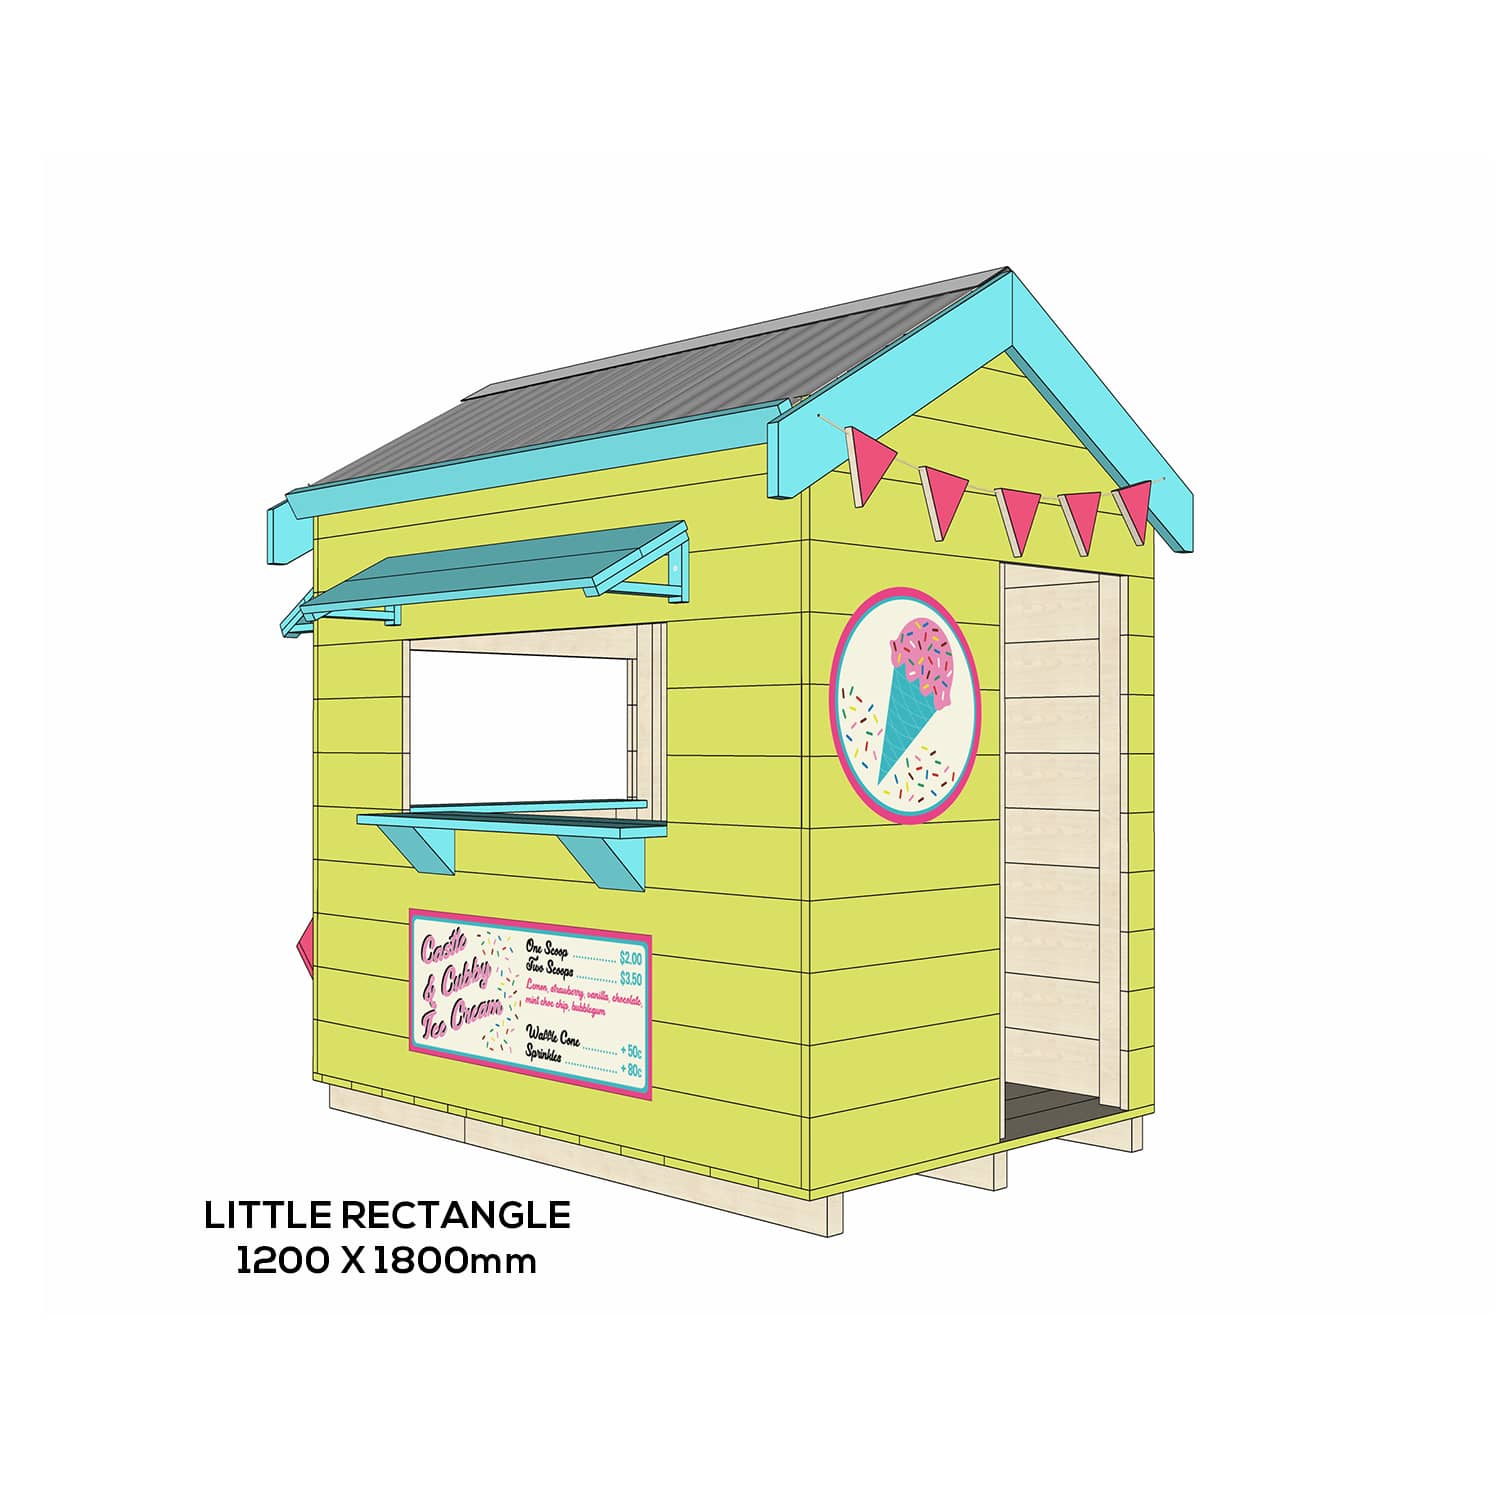 Painted wooden ice cream shop themed cubby little rectangle size